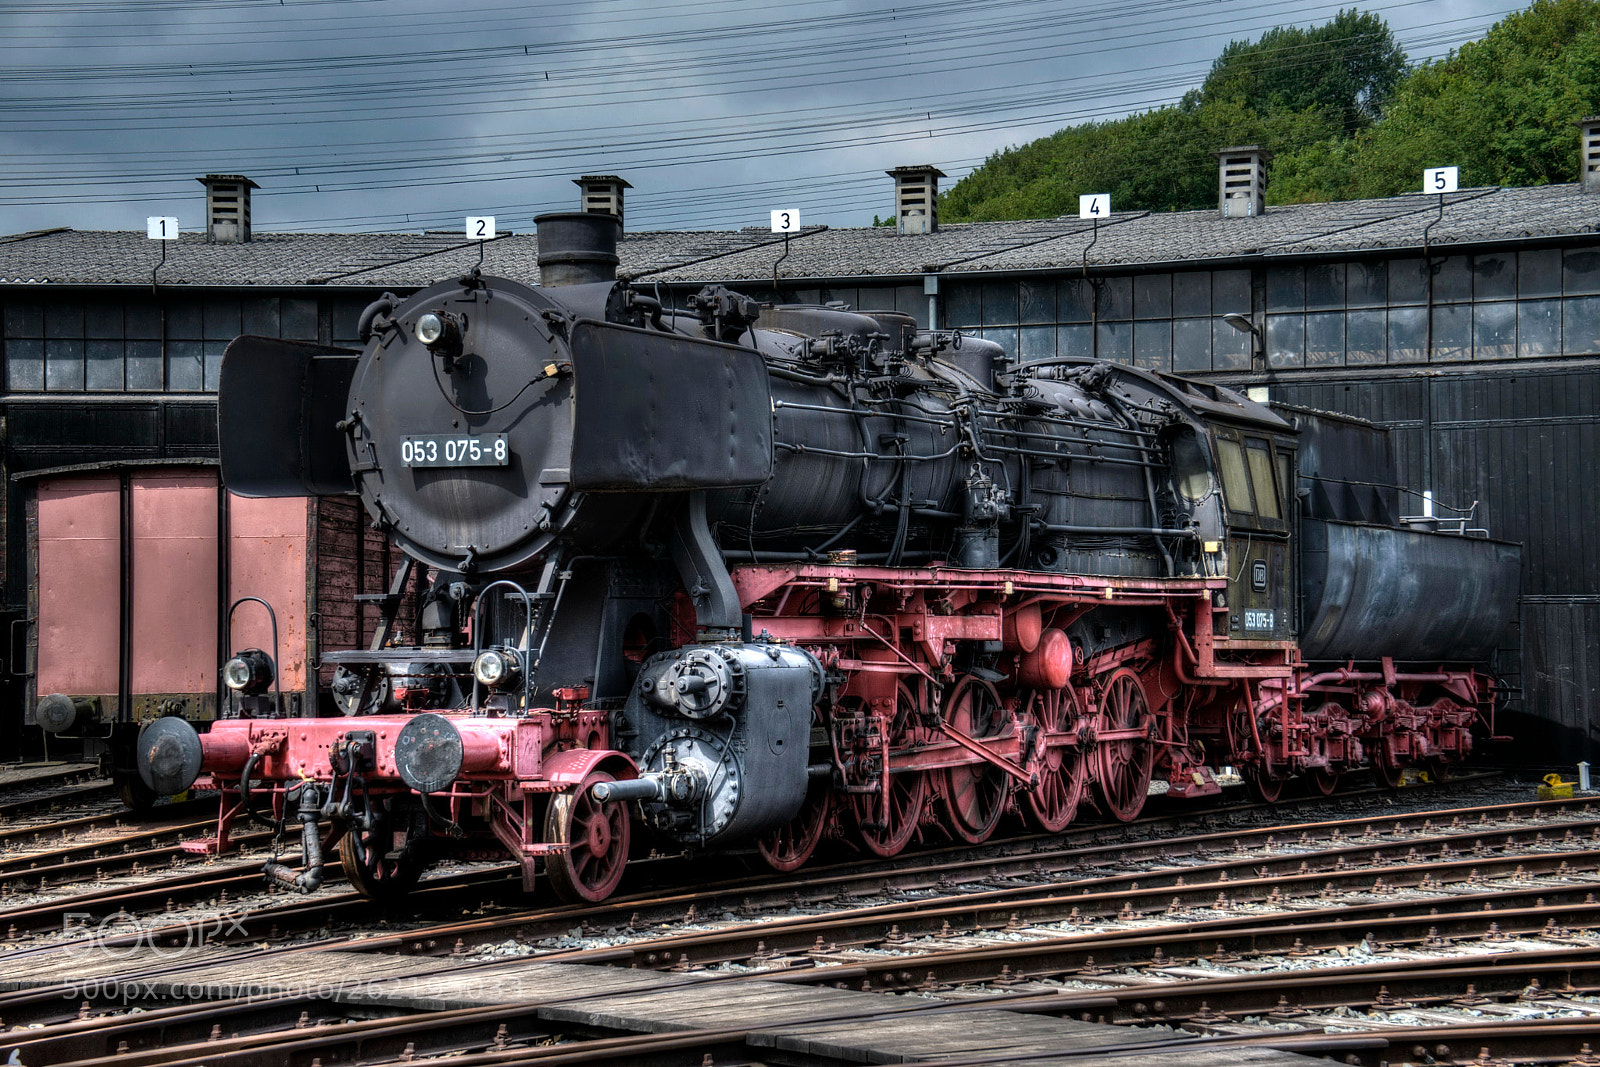 Sony a7 sample photo. Old steam locomotive photography